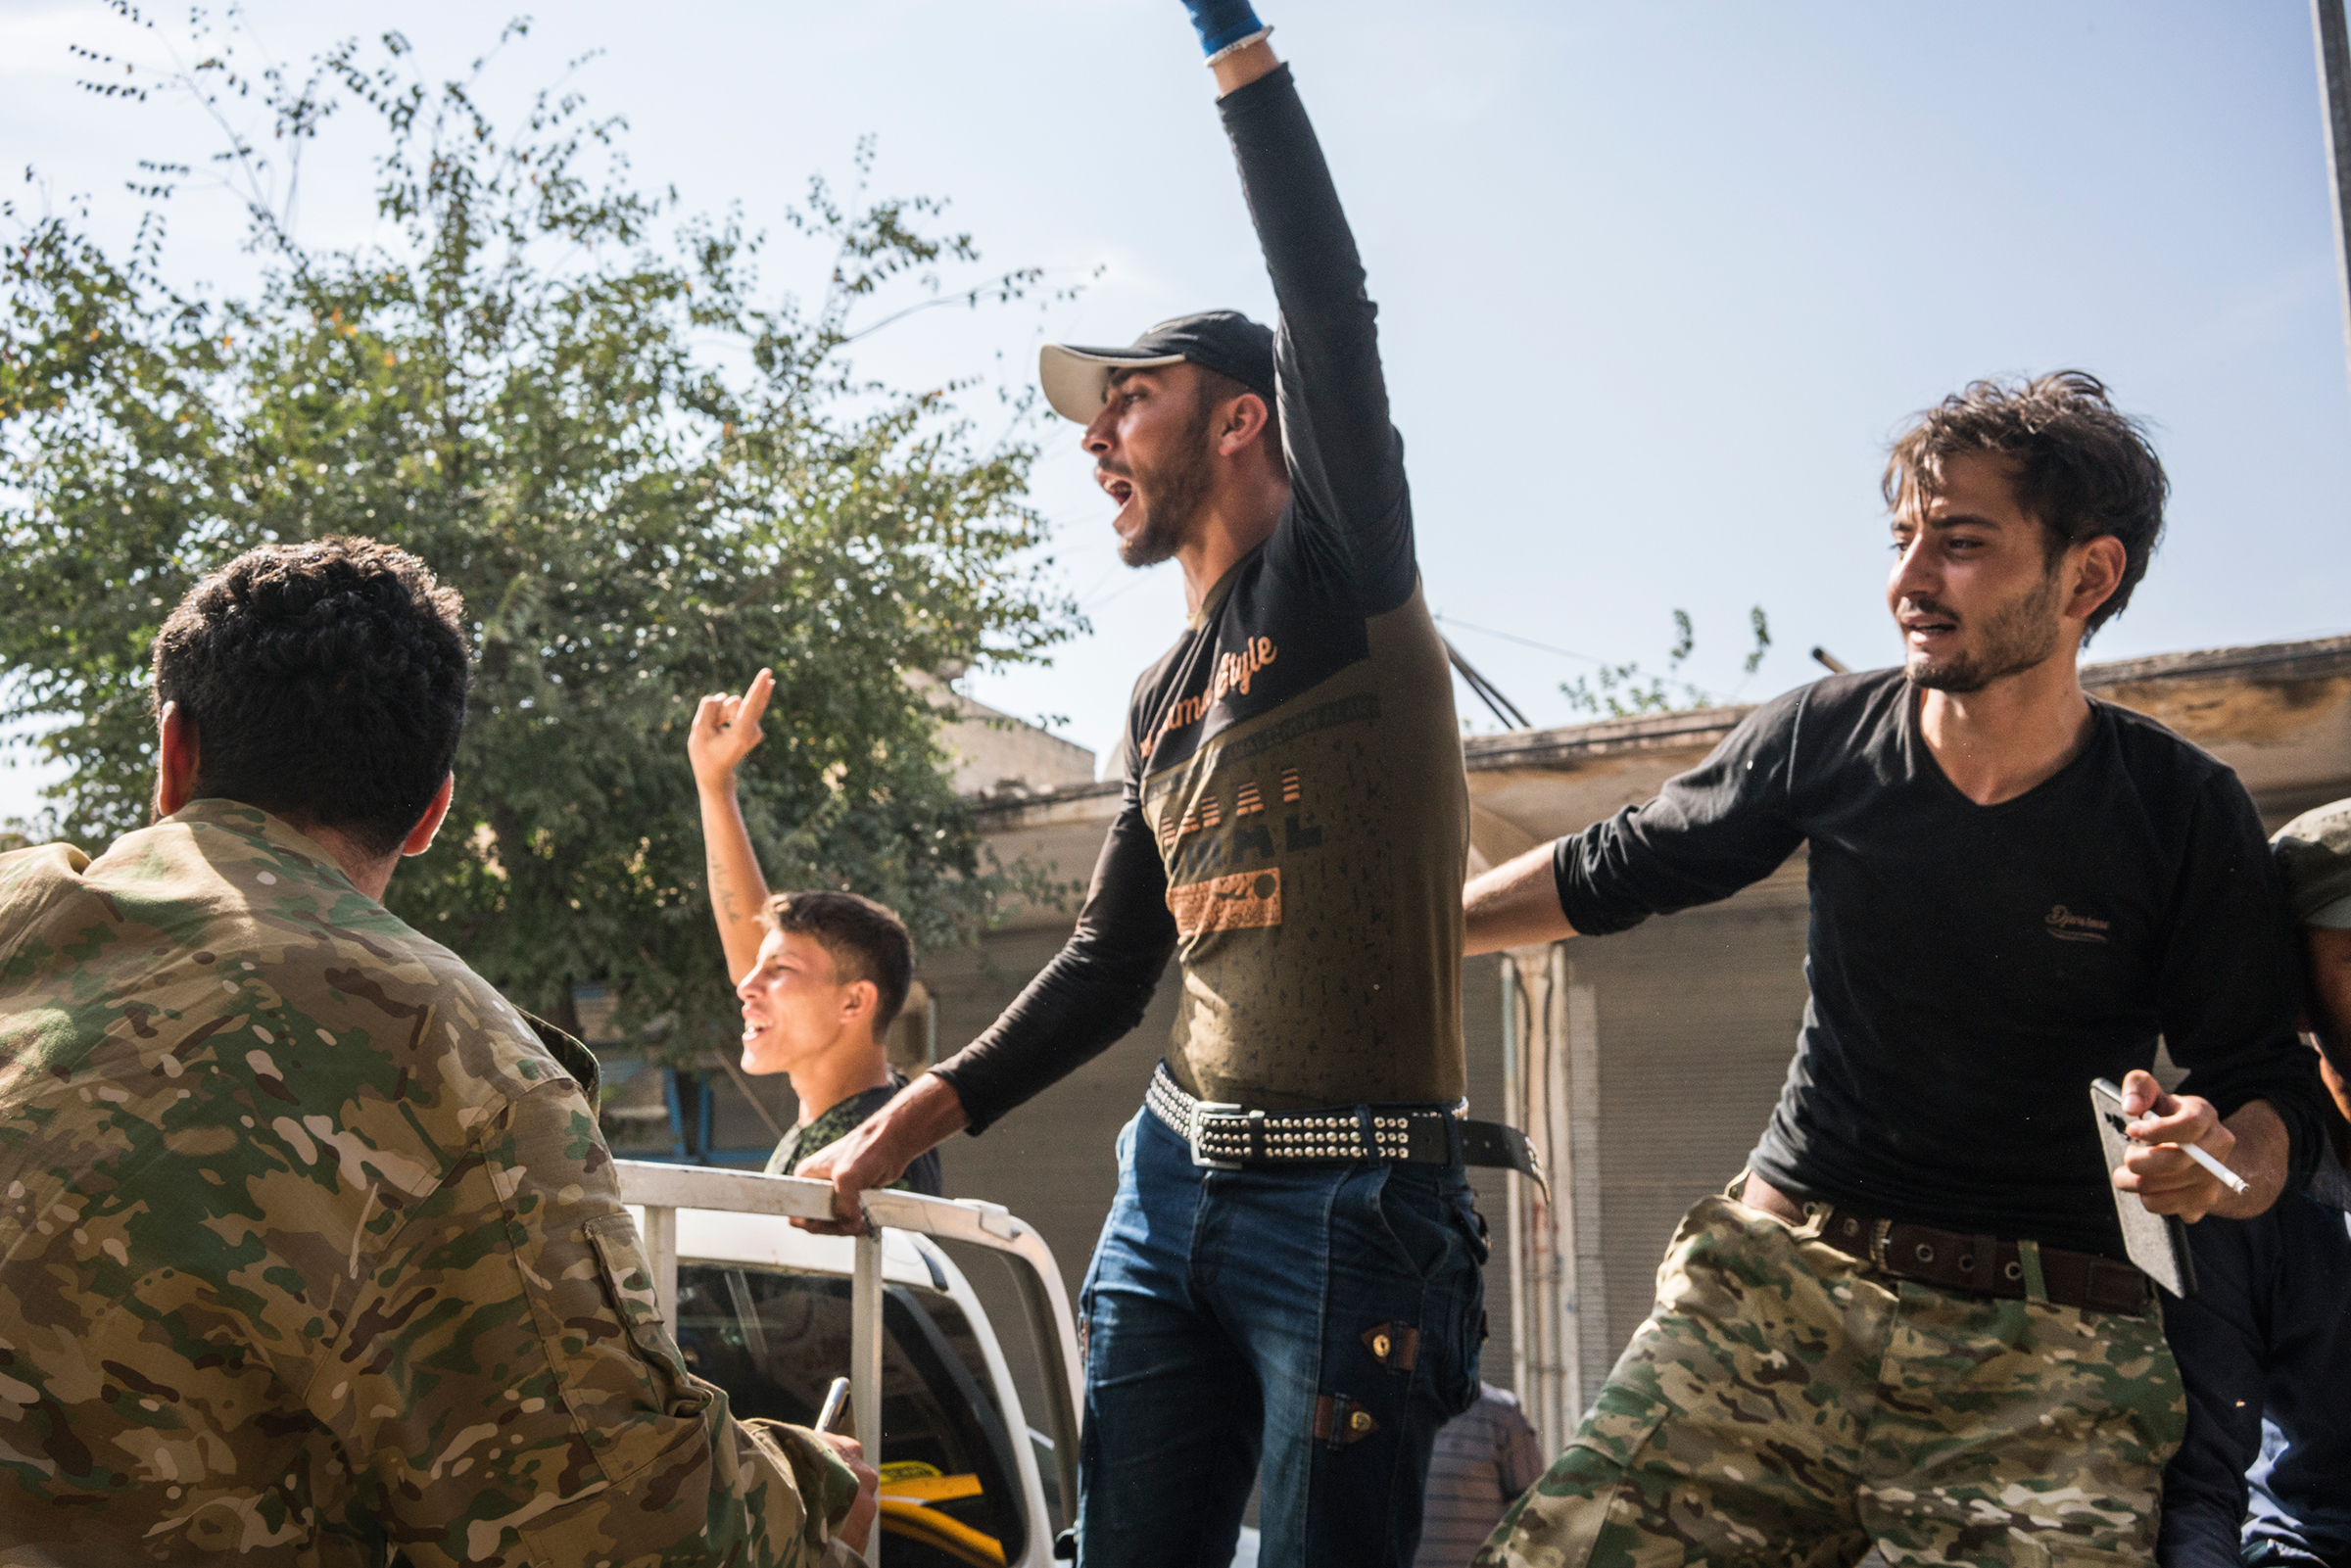 Turkish-backed Syrian rebels shout on the back of a pickup truck on a street in the Turkish border town of Akçakale on Oct. 14, 2019. (Emanuele Satolli)